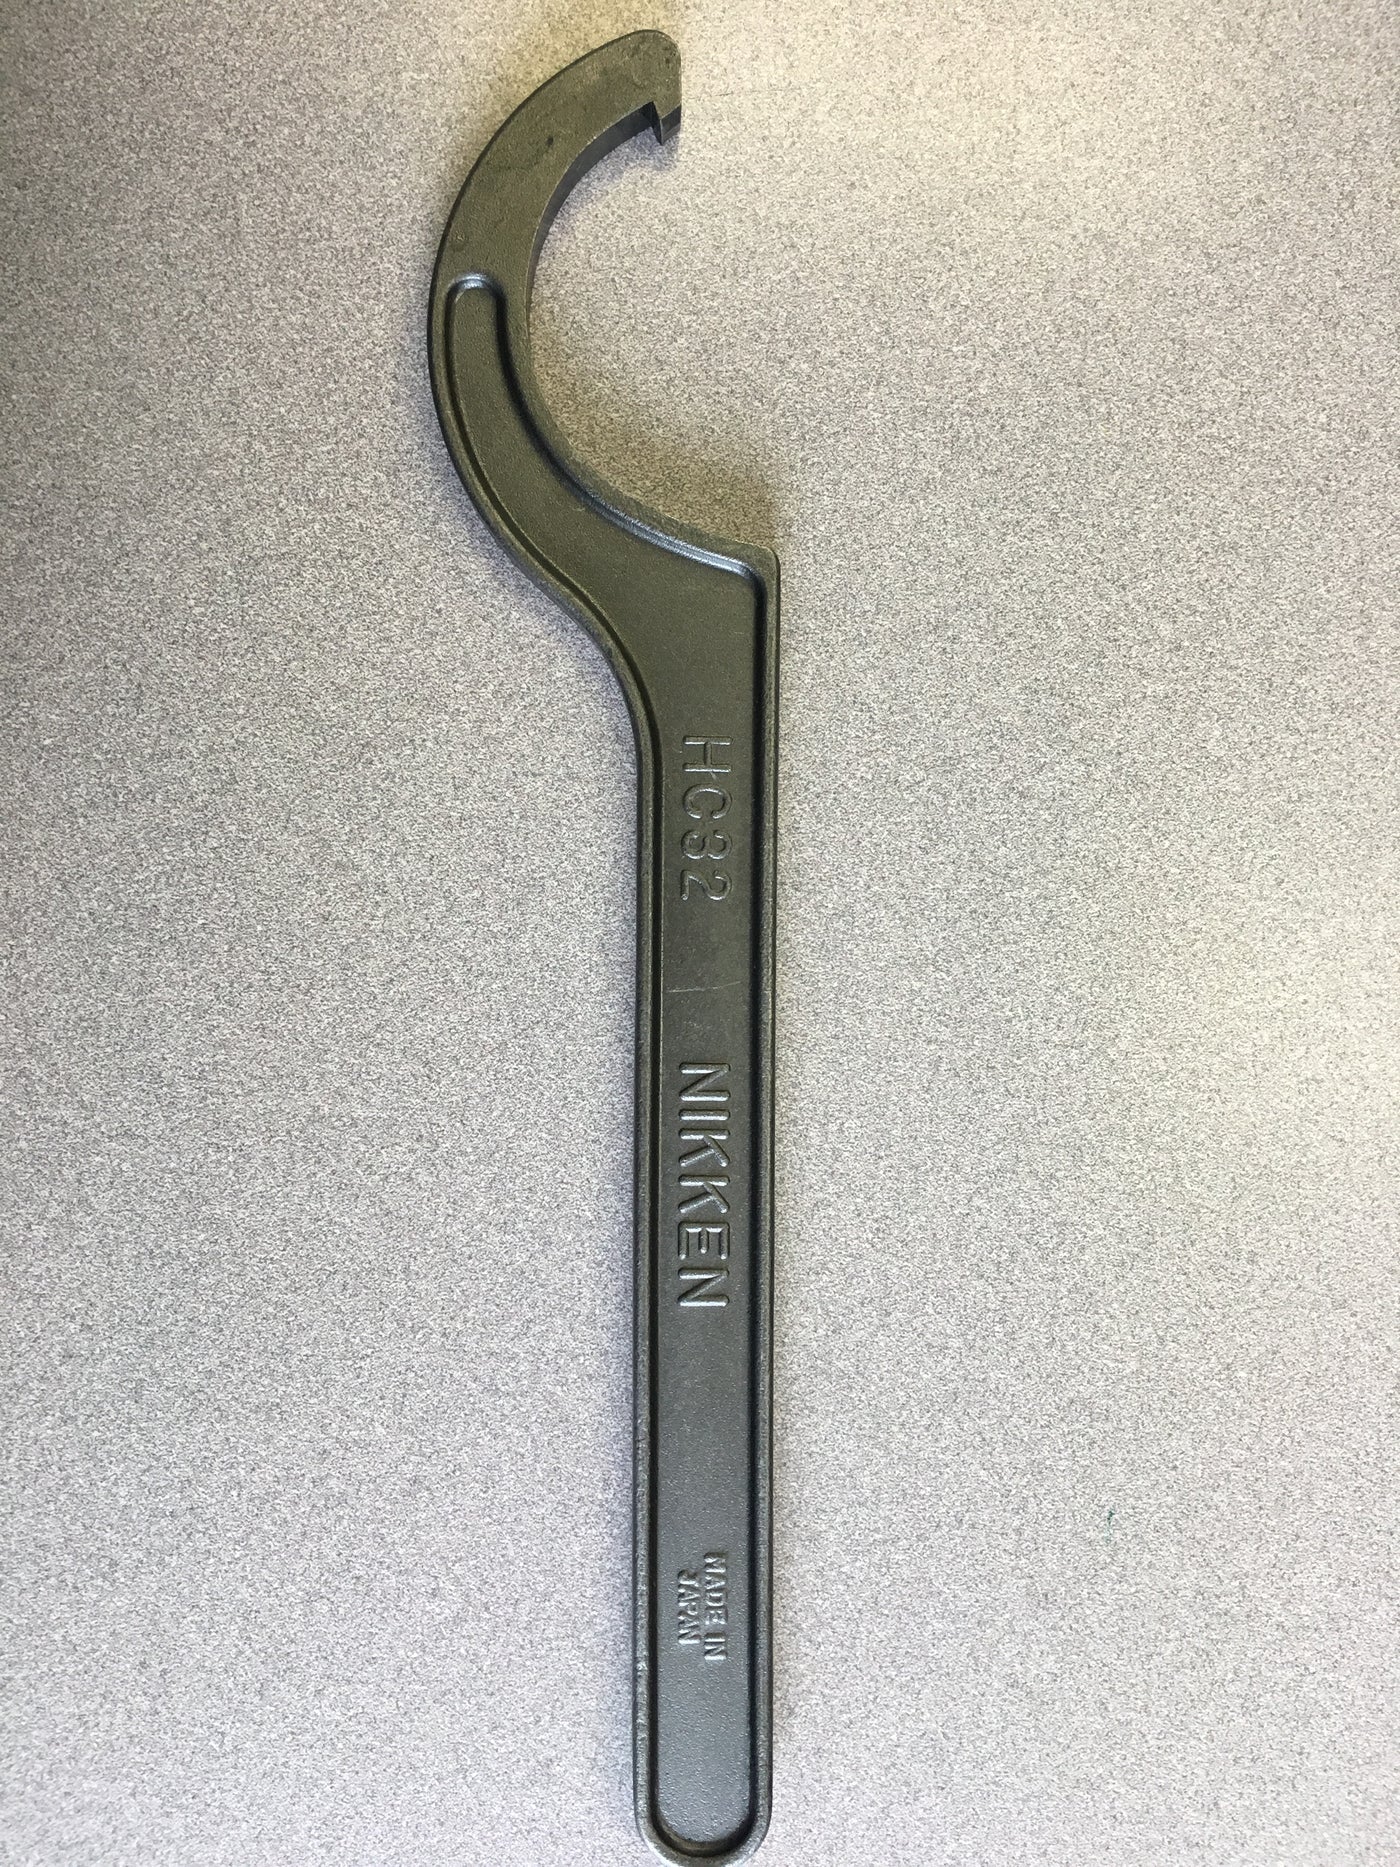 9HC32 (KM1.1/4 Spanner Wrench) – Indusource, Inc.